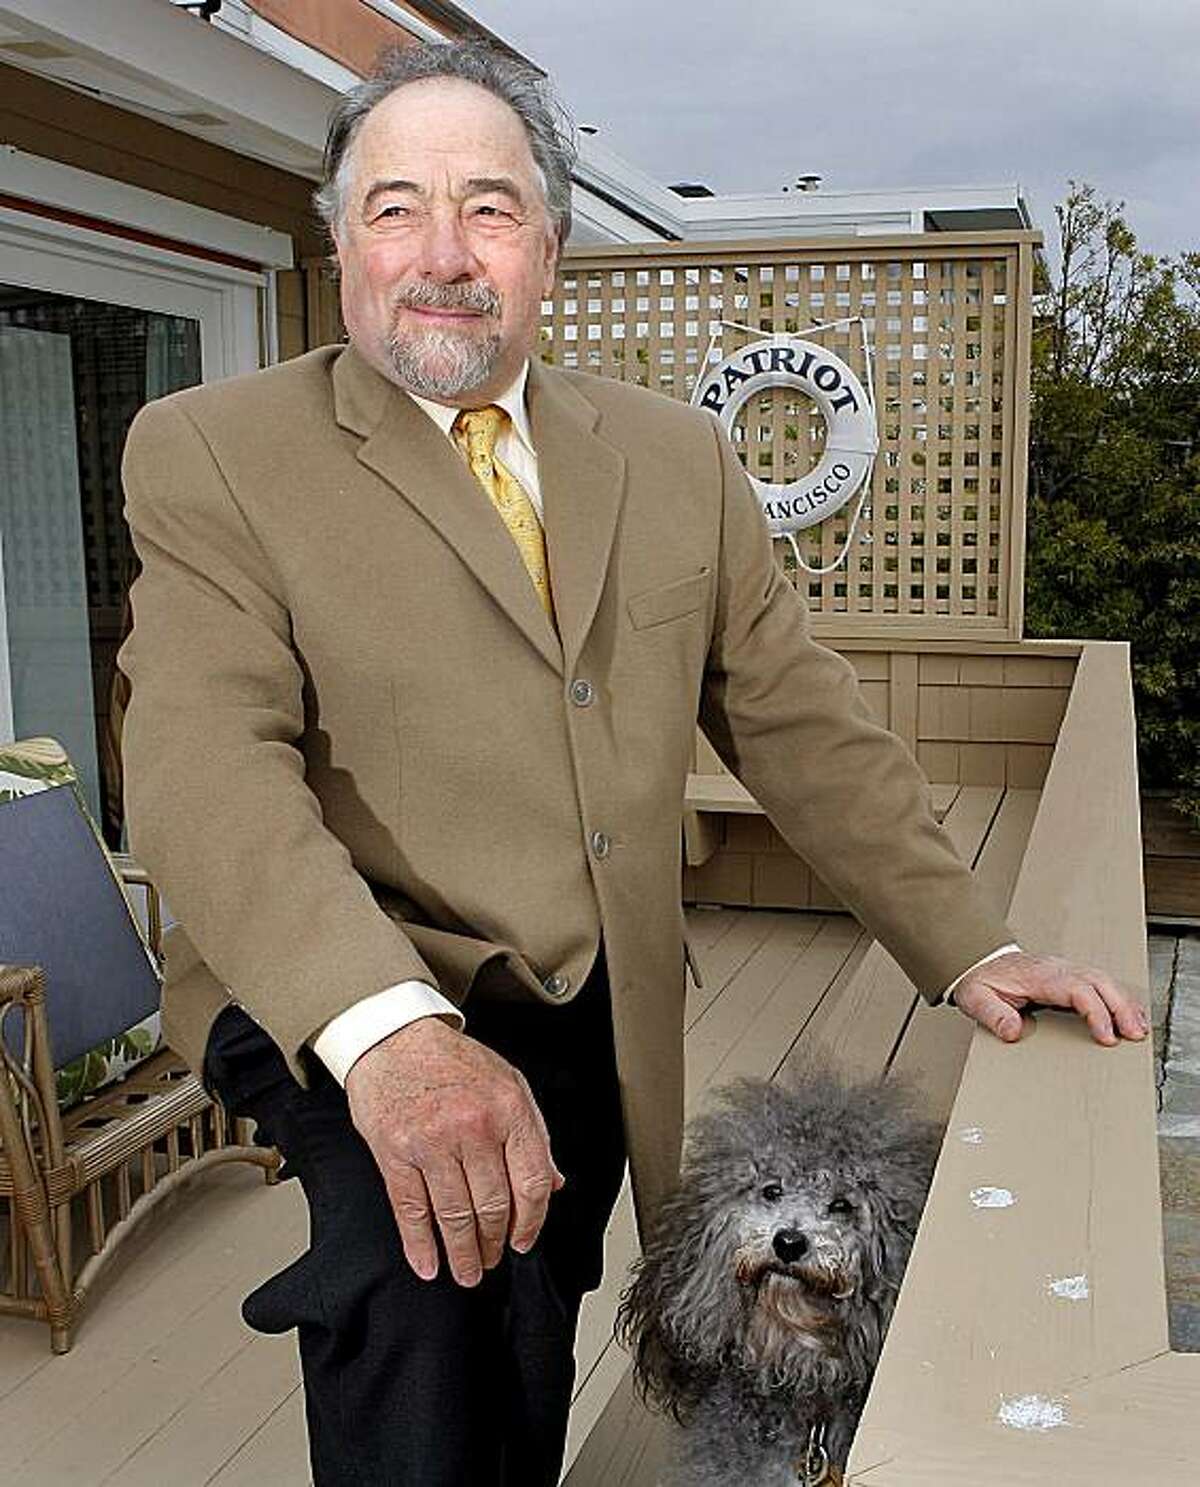 ** FILE ** In this Monday, Dec. 3, 2007 file photo, radio talk show host Michael Savage poses with his dog Teddy in Tiburon, Calif. Radio talk show host Michael Savage, who described 99 percent of children with autism as brats, said Monday July 21, 2008 he was trying to "boldly awaken" parents to his view that many people are being wrongly diagnosed. (AP Photo/John Storey)